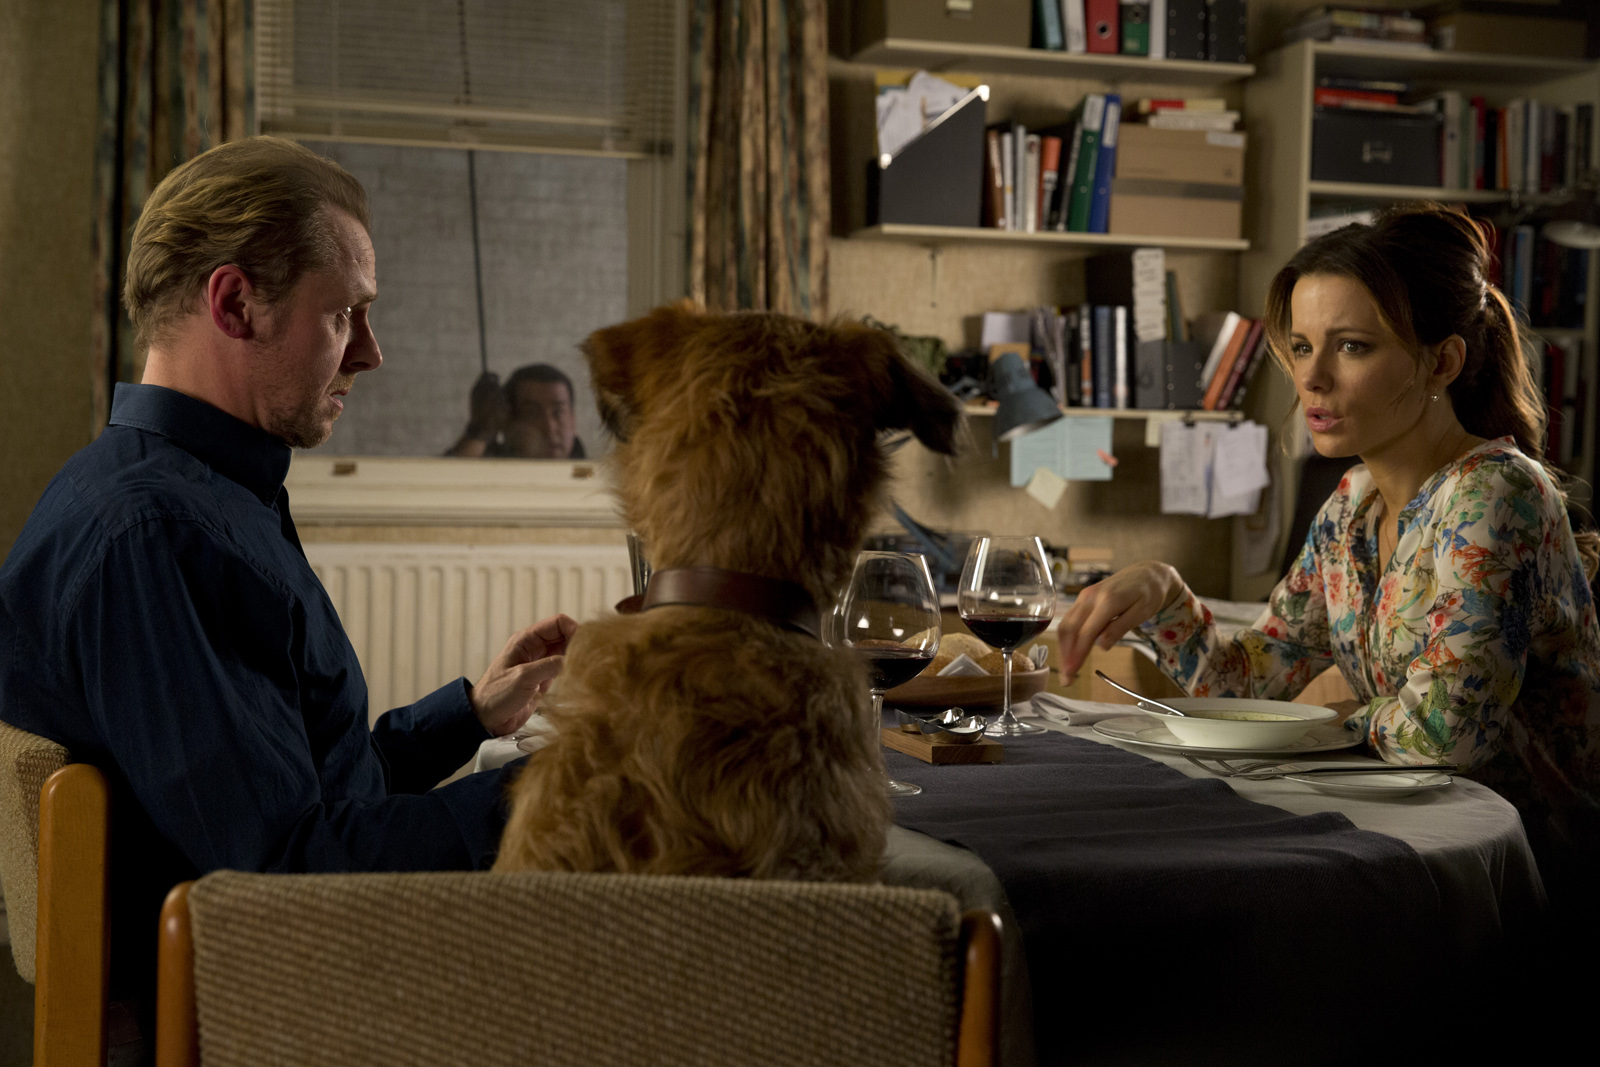 Absolutely Anything - Absolutely Anything à l'anglaise simon pegg kate beckinsale absolutely anything1